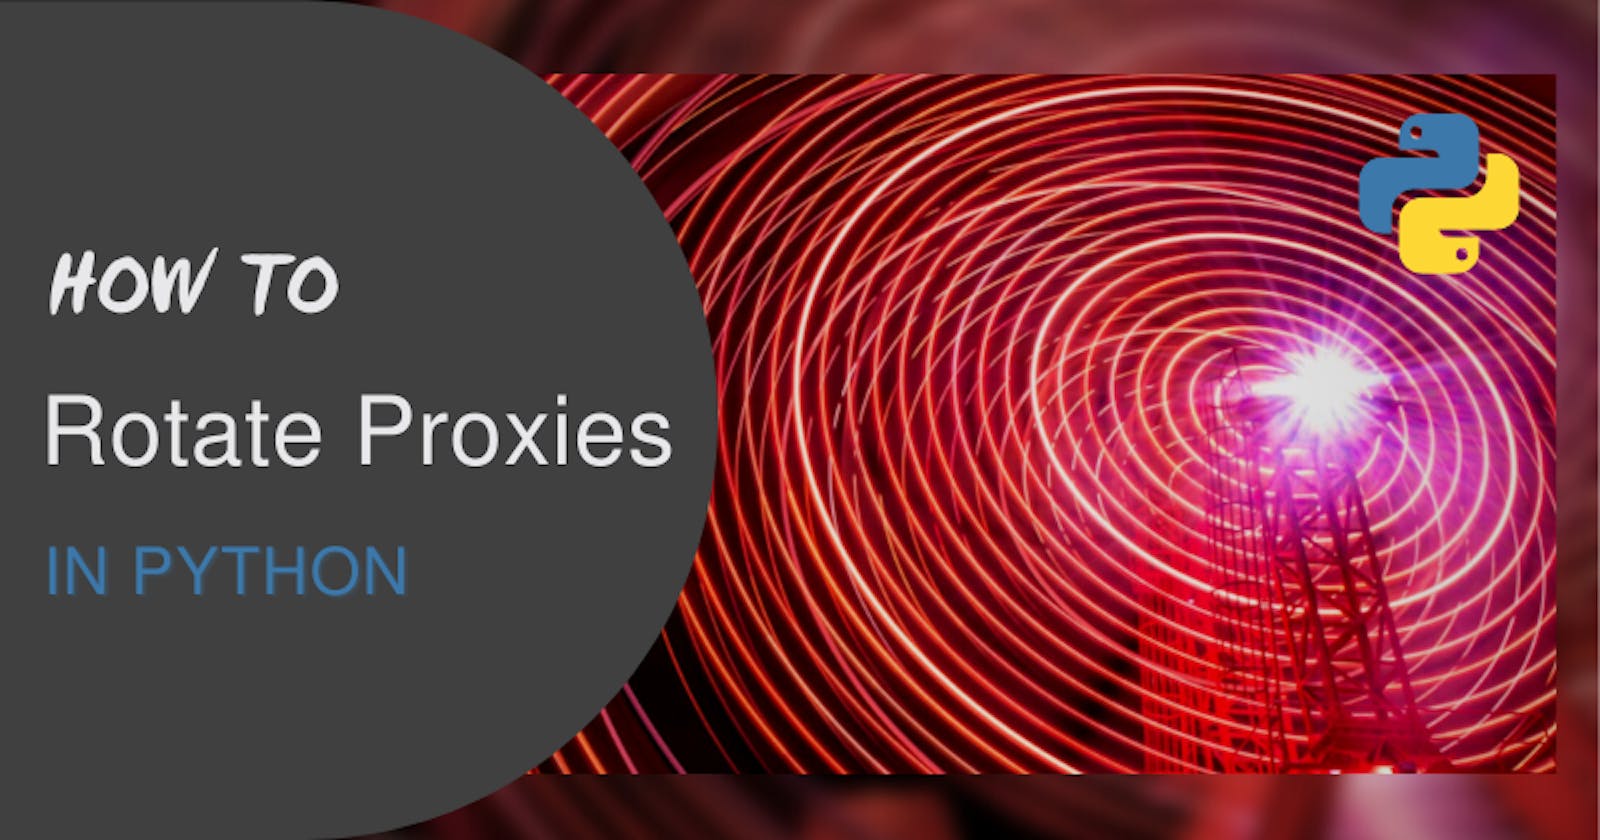 How To Rotate Proxies in Python